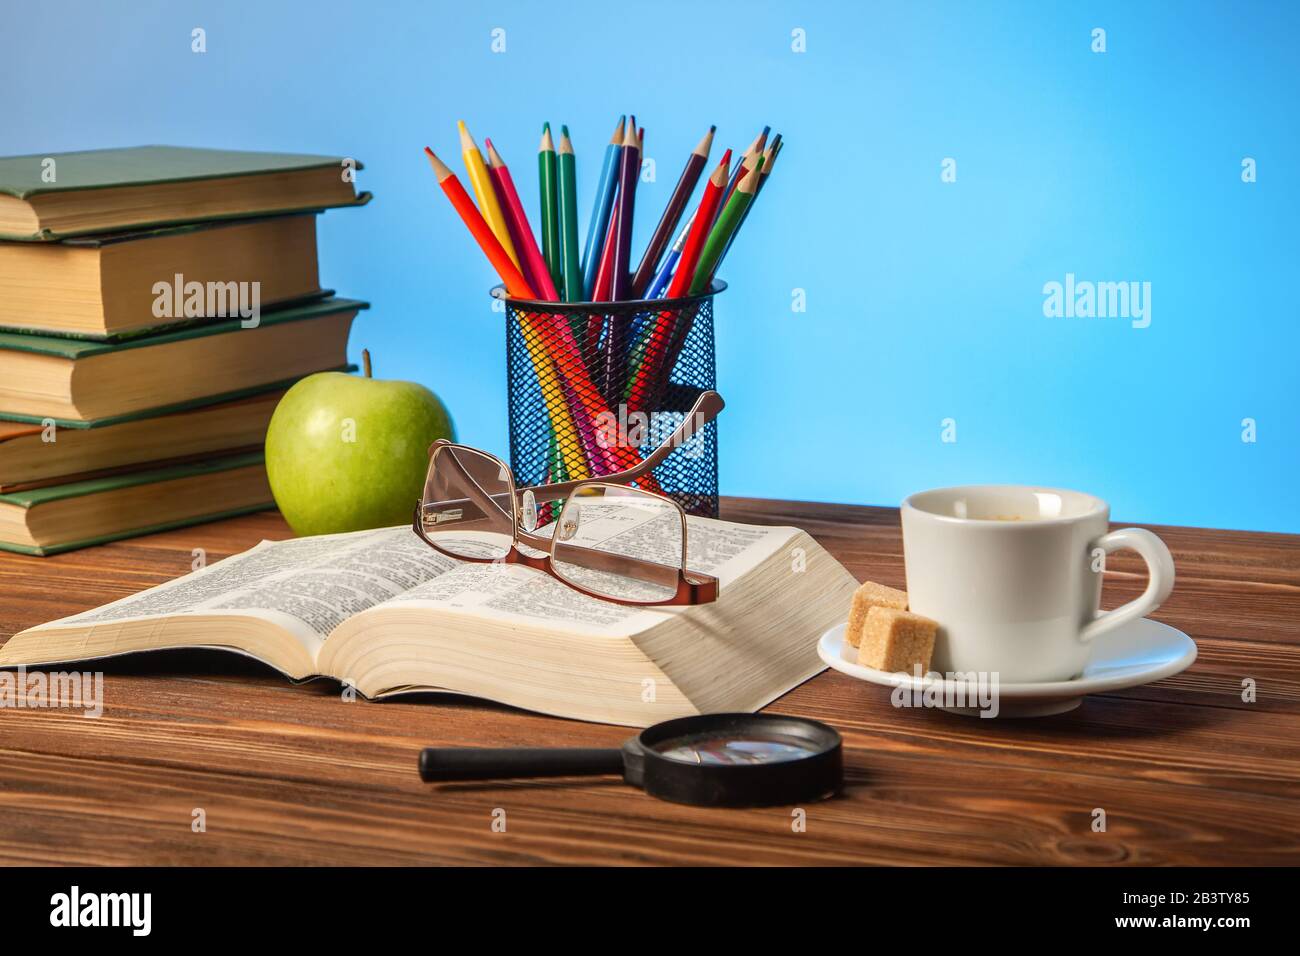 An open book on the table, glasses, a cup of cappuccino coffee with sugar cubes, color pencils on a blue background. Stock Photo